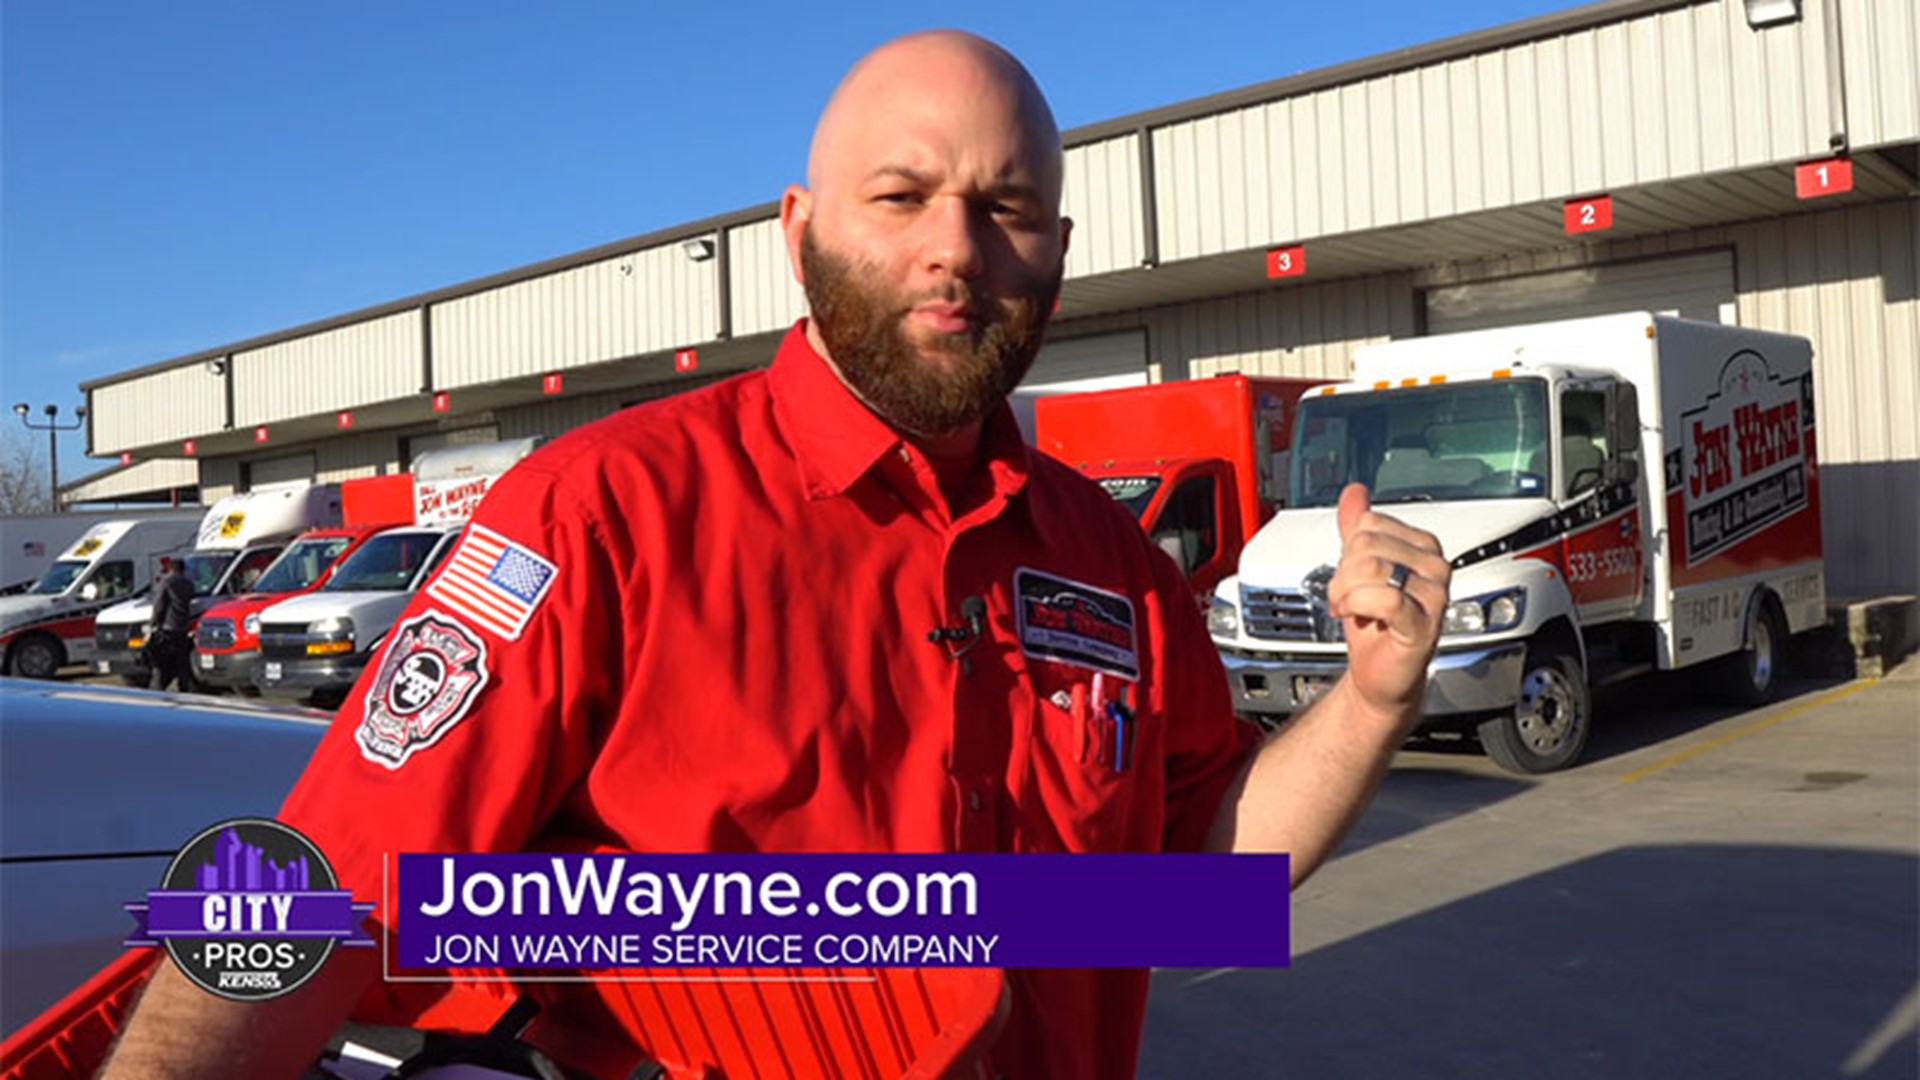 Jon Wayne's service team is ready to make sure all of your home's needs are met!